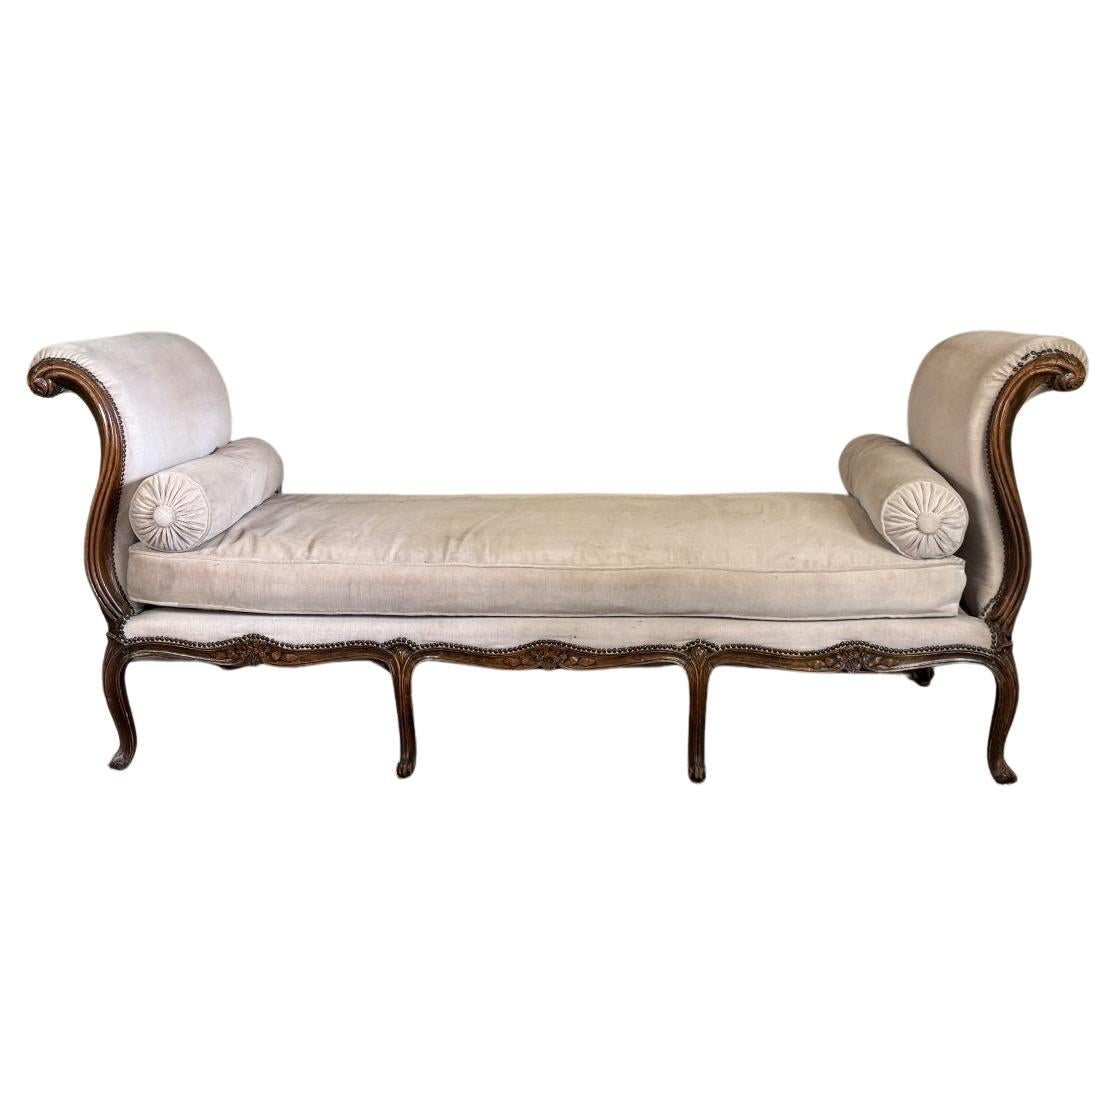 Louis XV Daybed In Beech Carved On All 4 Sides, France, 18th Century For Sale